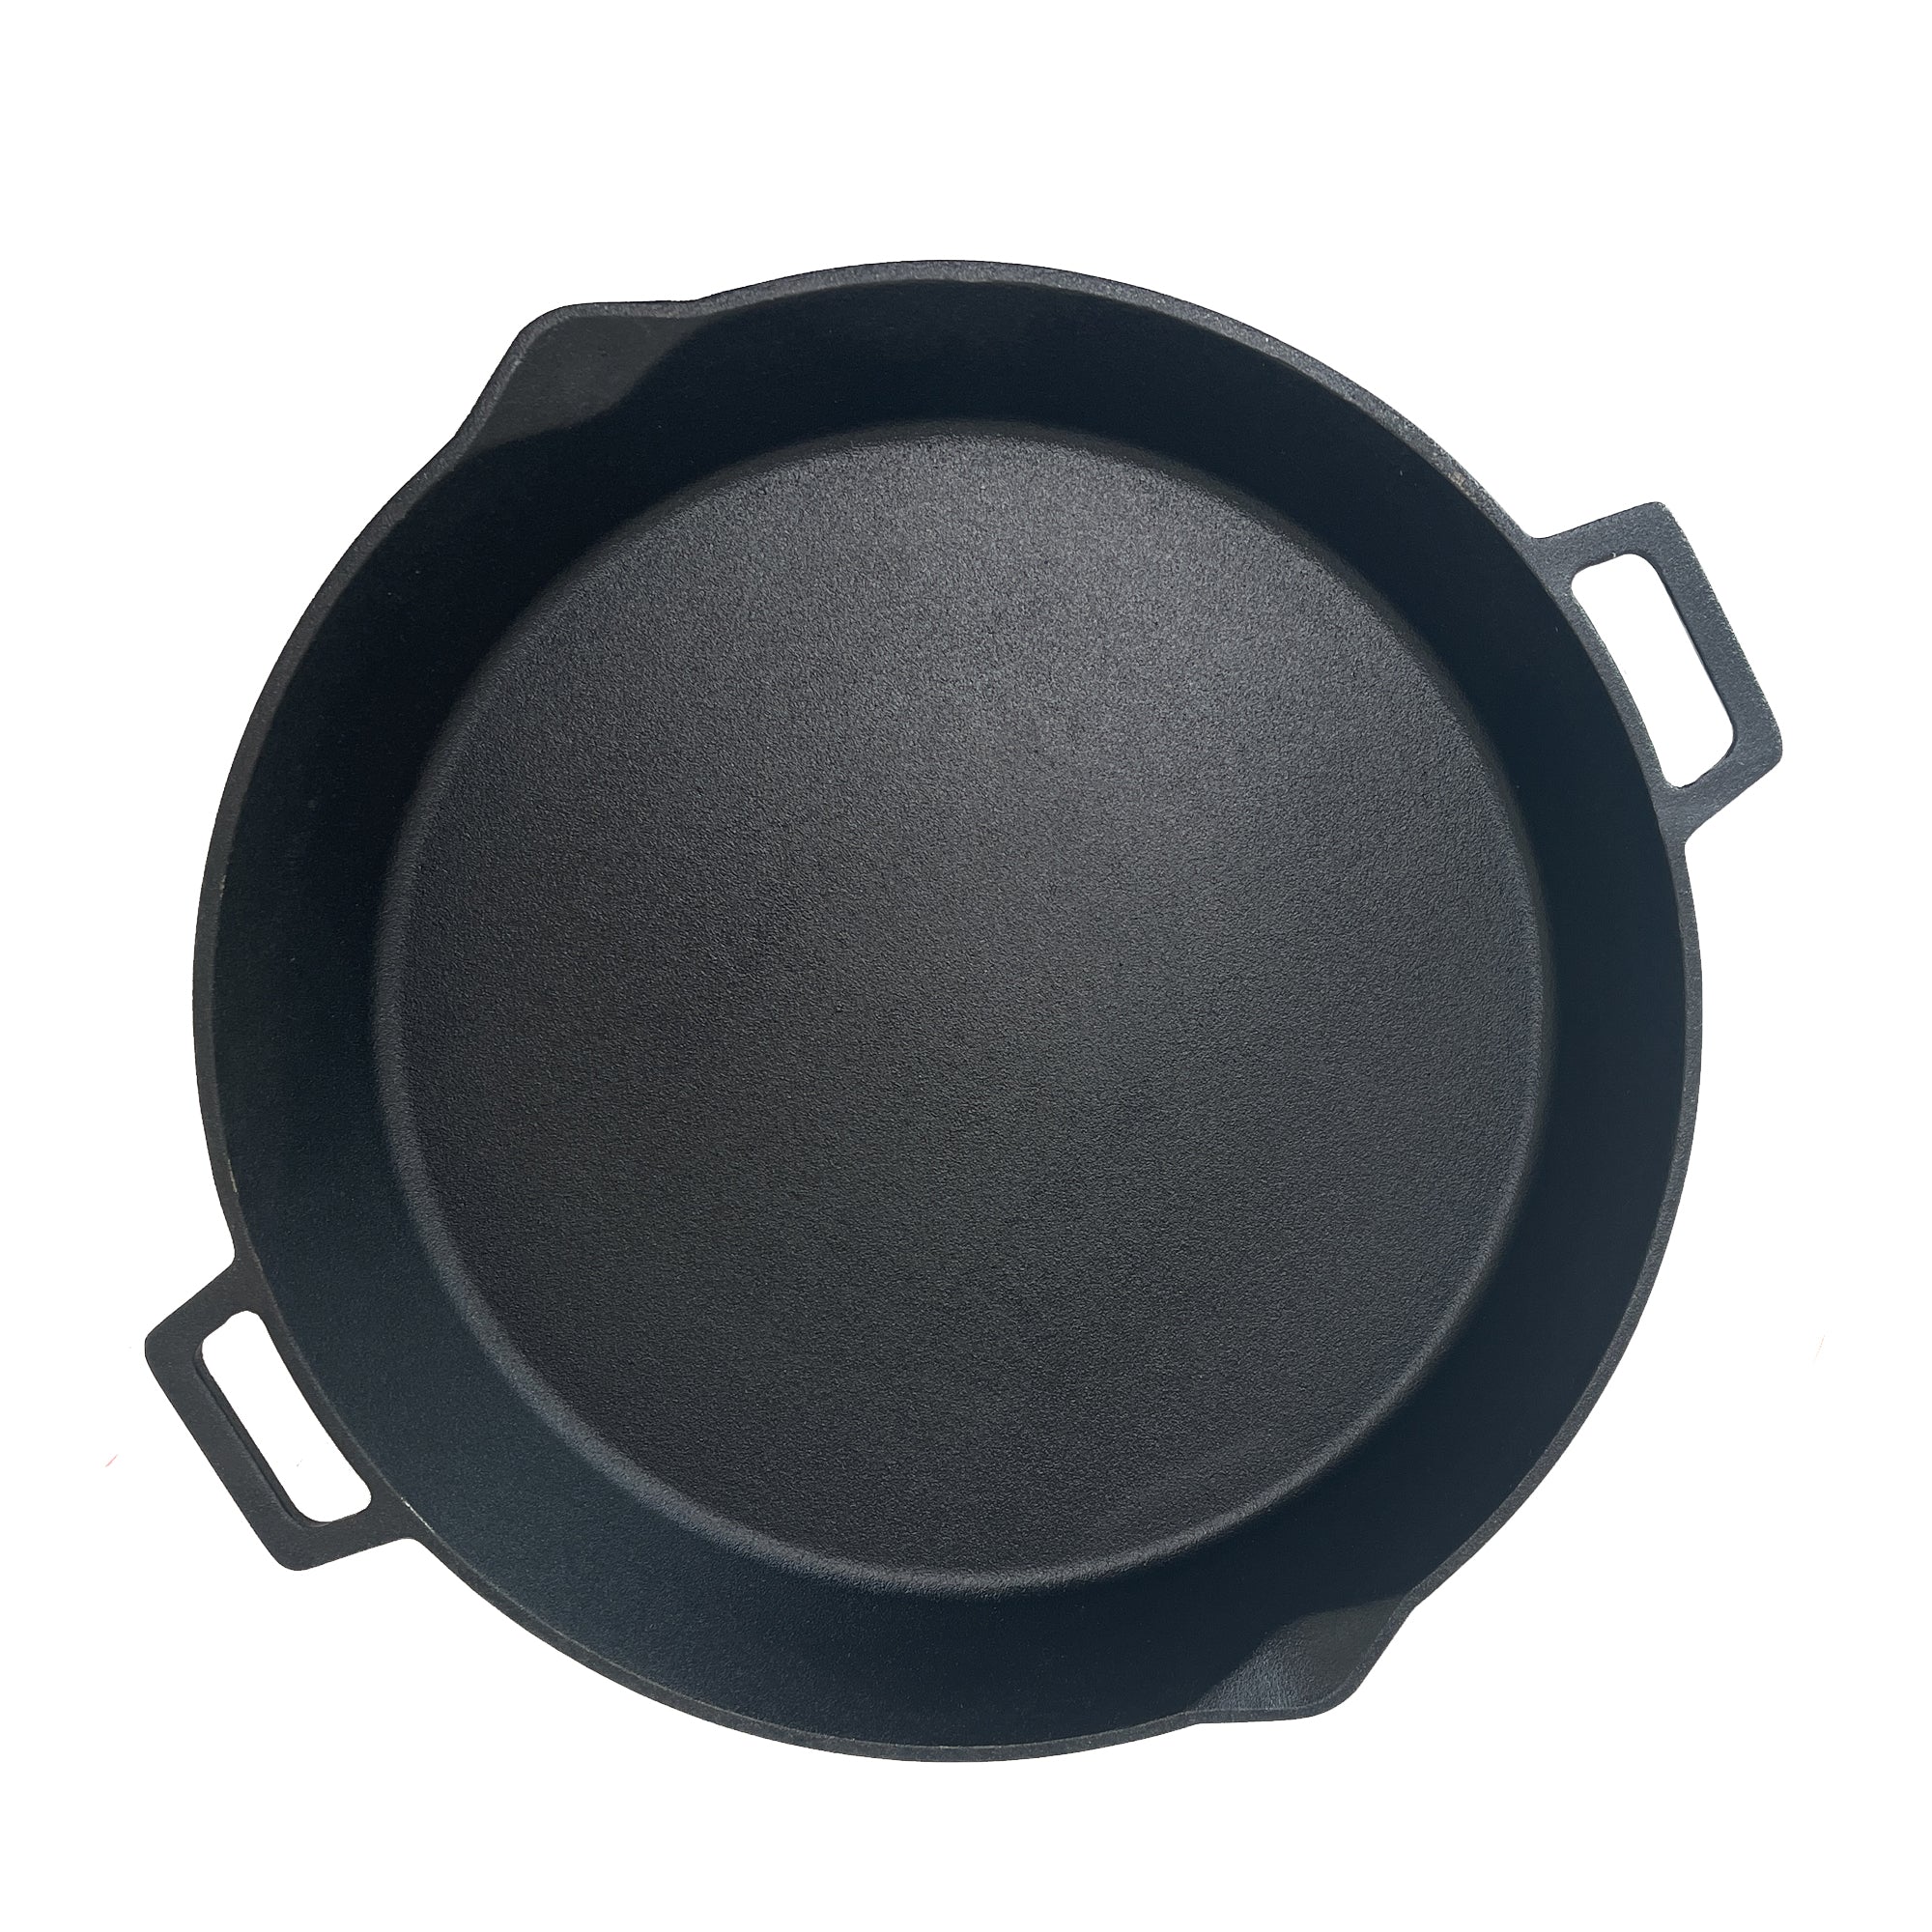 Bayou Classic 12 Inch Square Cast Iron Skillet Cookware Pan with Helper  Handle and Pour Spouts for Home Kitchen Cooking, Black